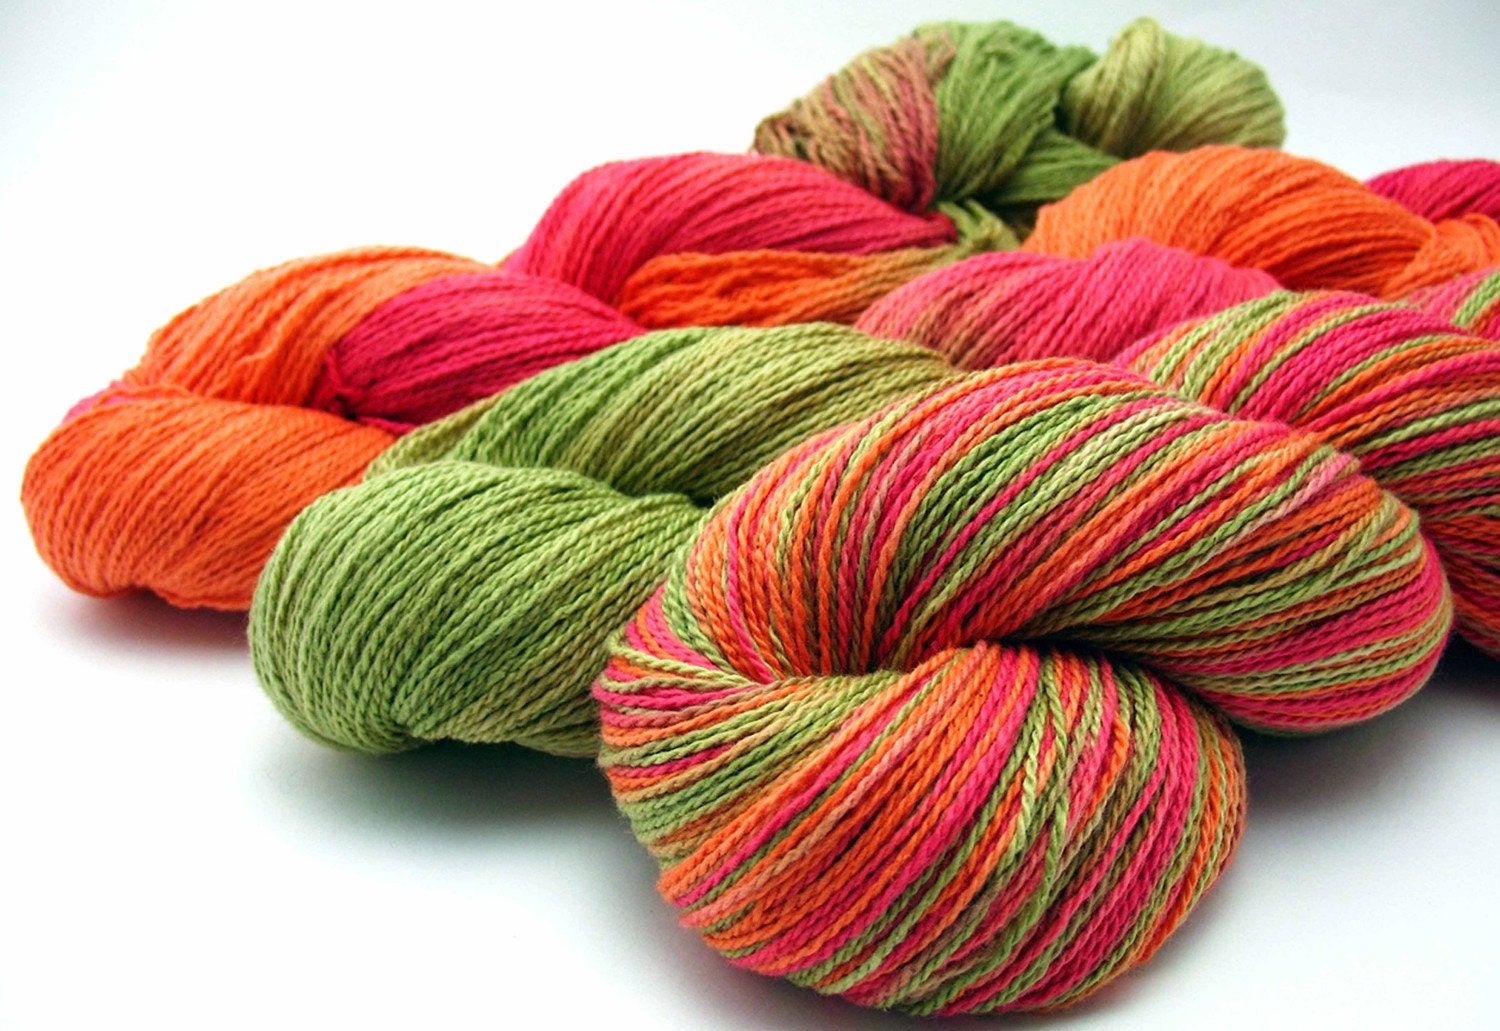 Yarn for knitting, crocheting and weaving, fiber for spinning and